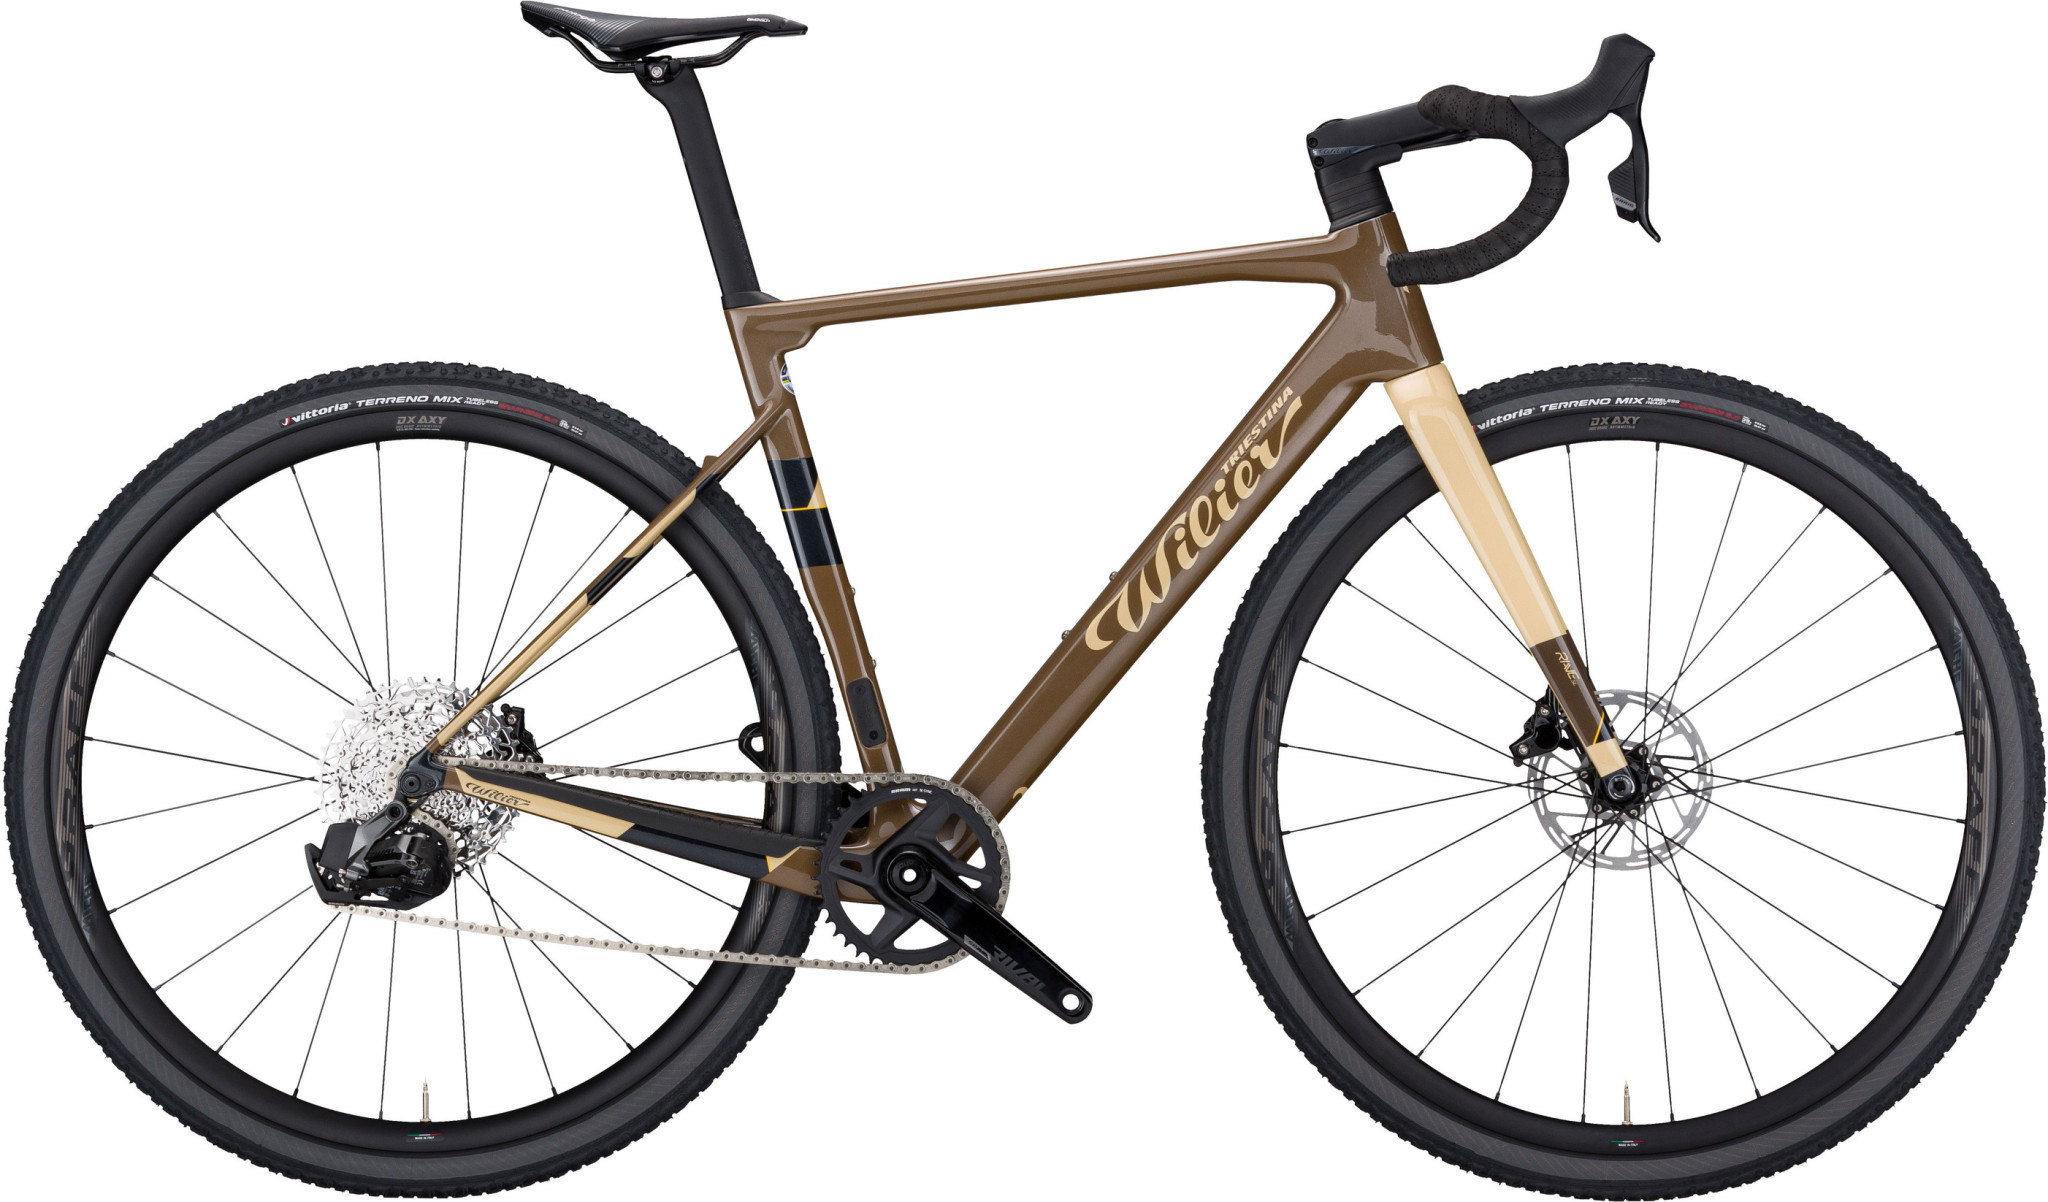 WILIER TRIESTINA WILIER BICYCLE GRAVEL RAVE SL